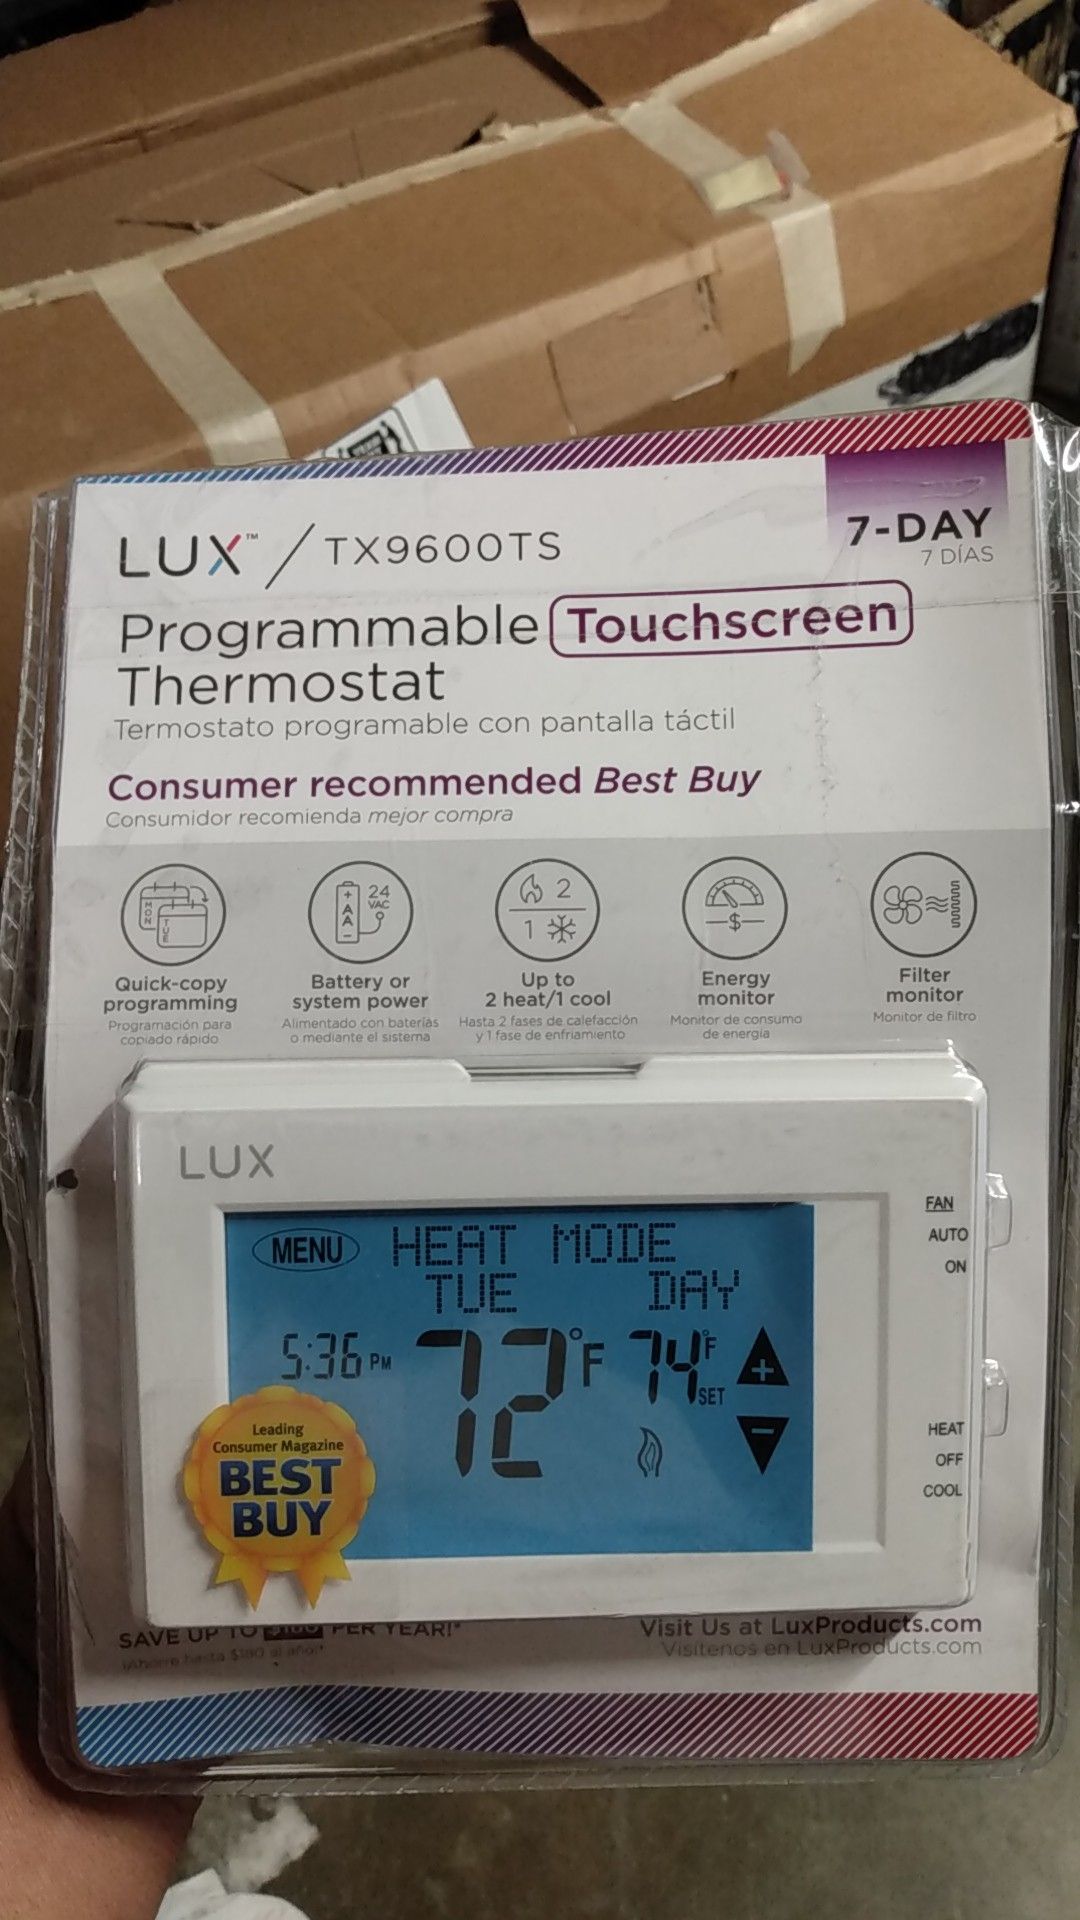 Programmable touchscreen thermostat